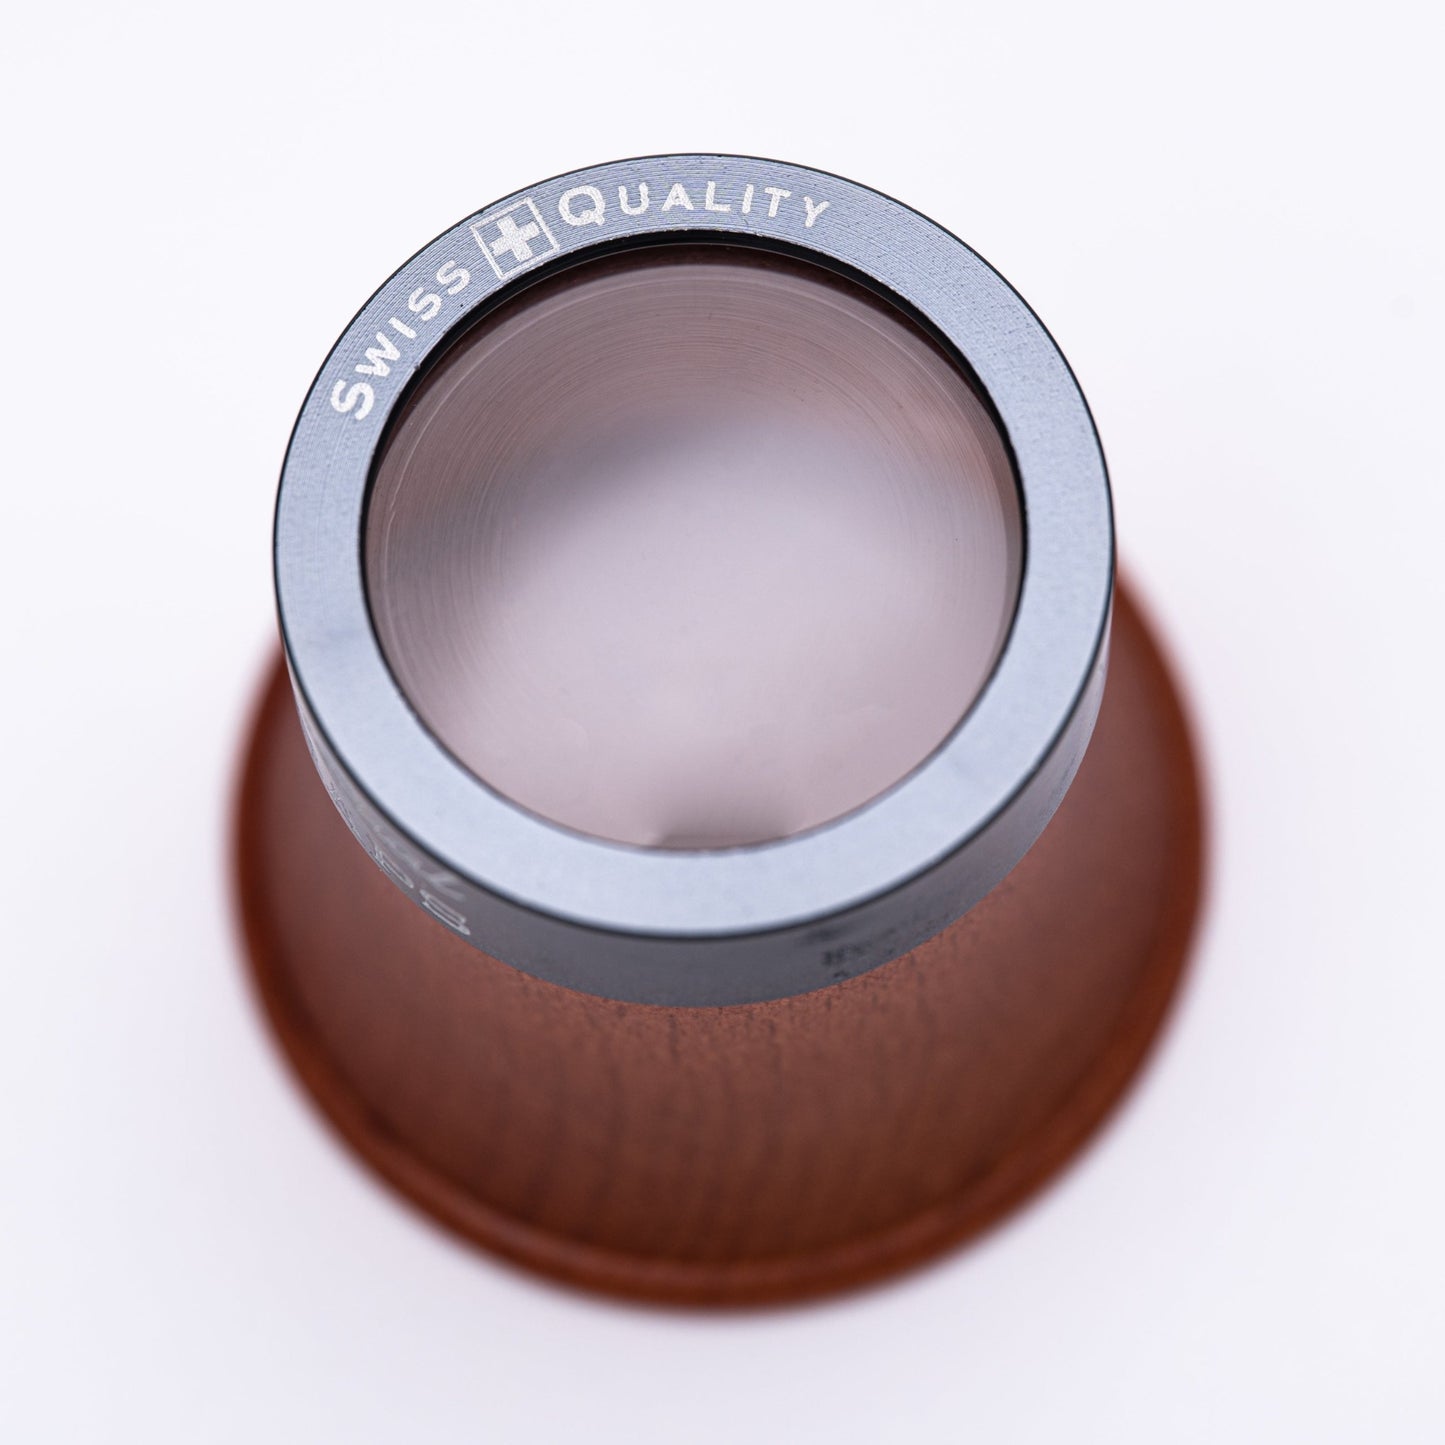 10X WATCHMAKERS LOUPE - PREMIUM SWISS QUALITY MAGNIFICATION LENS